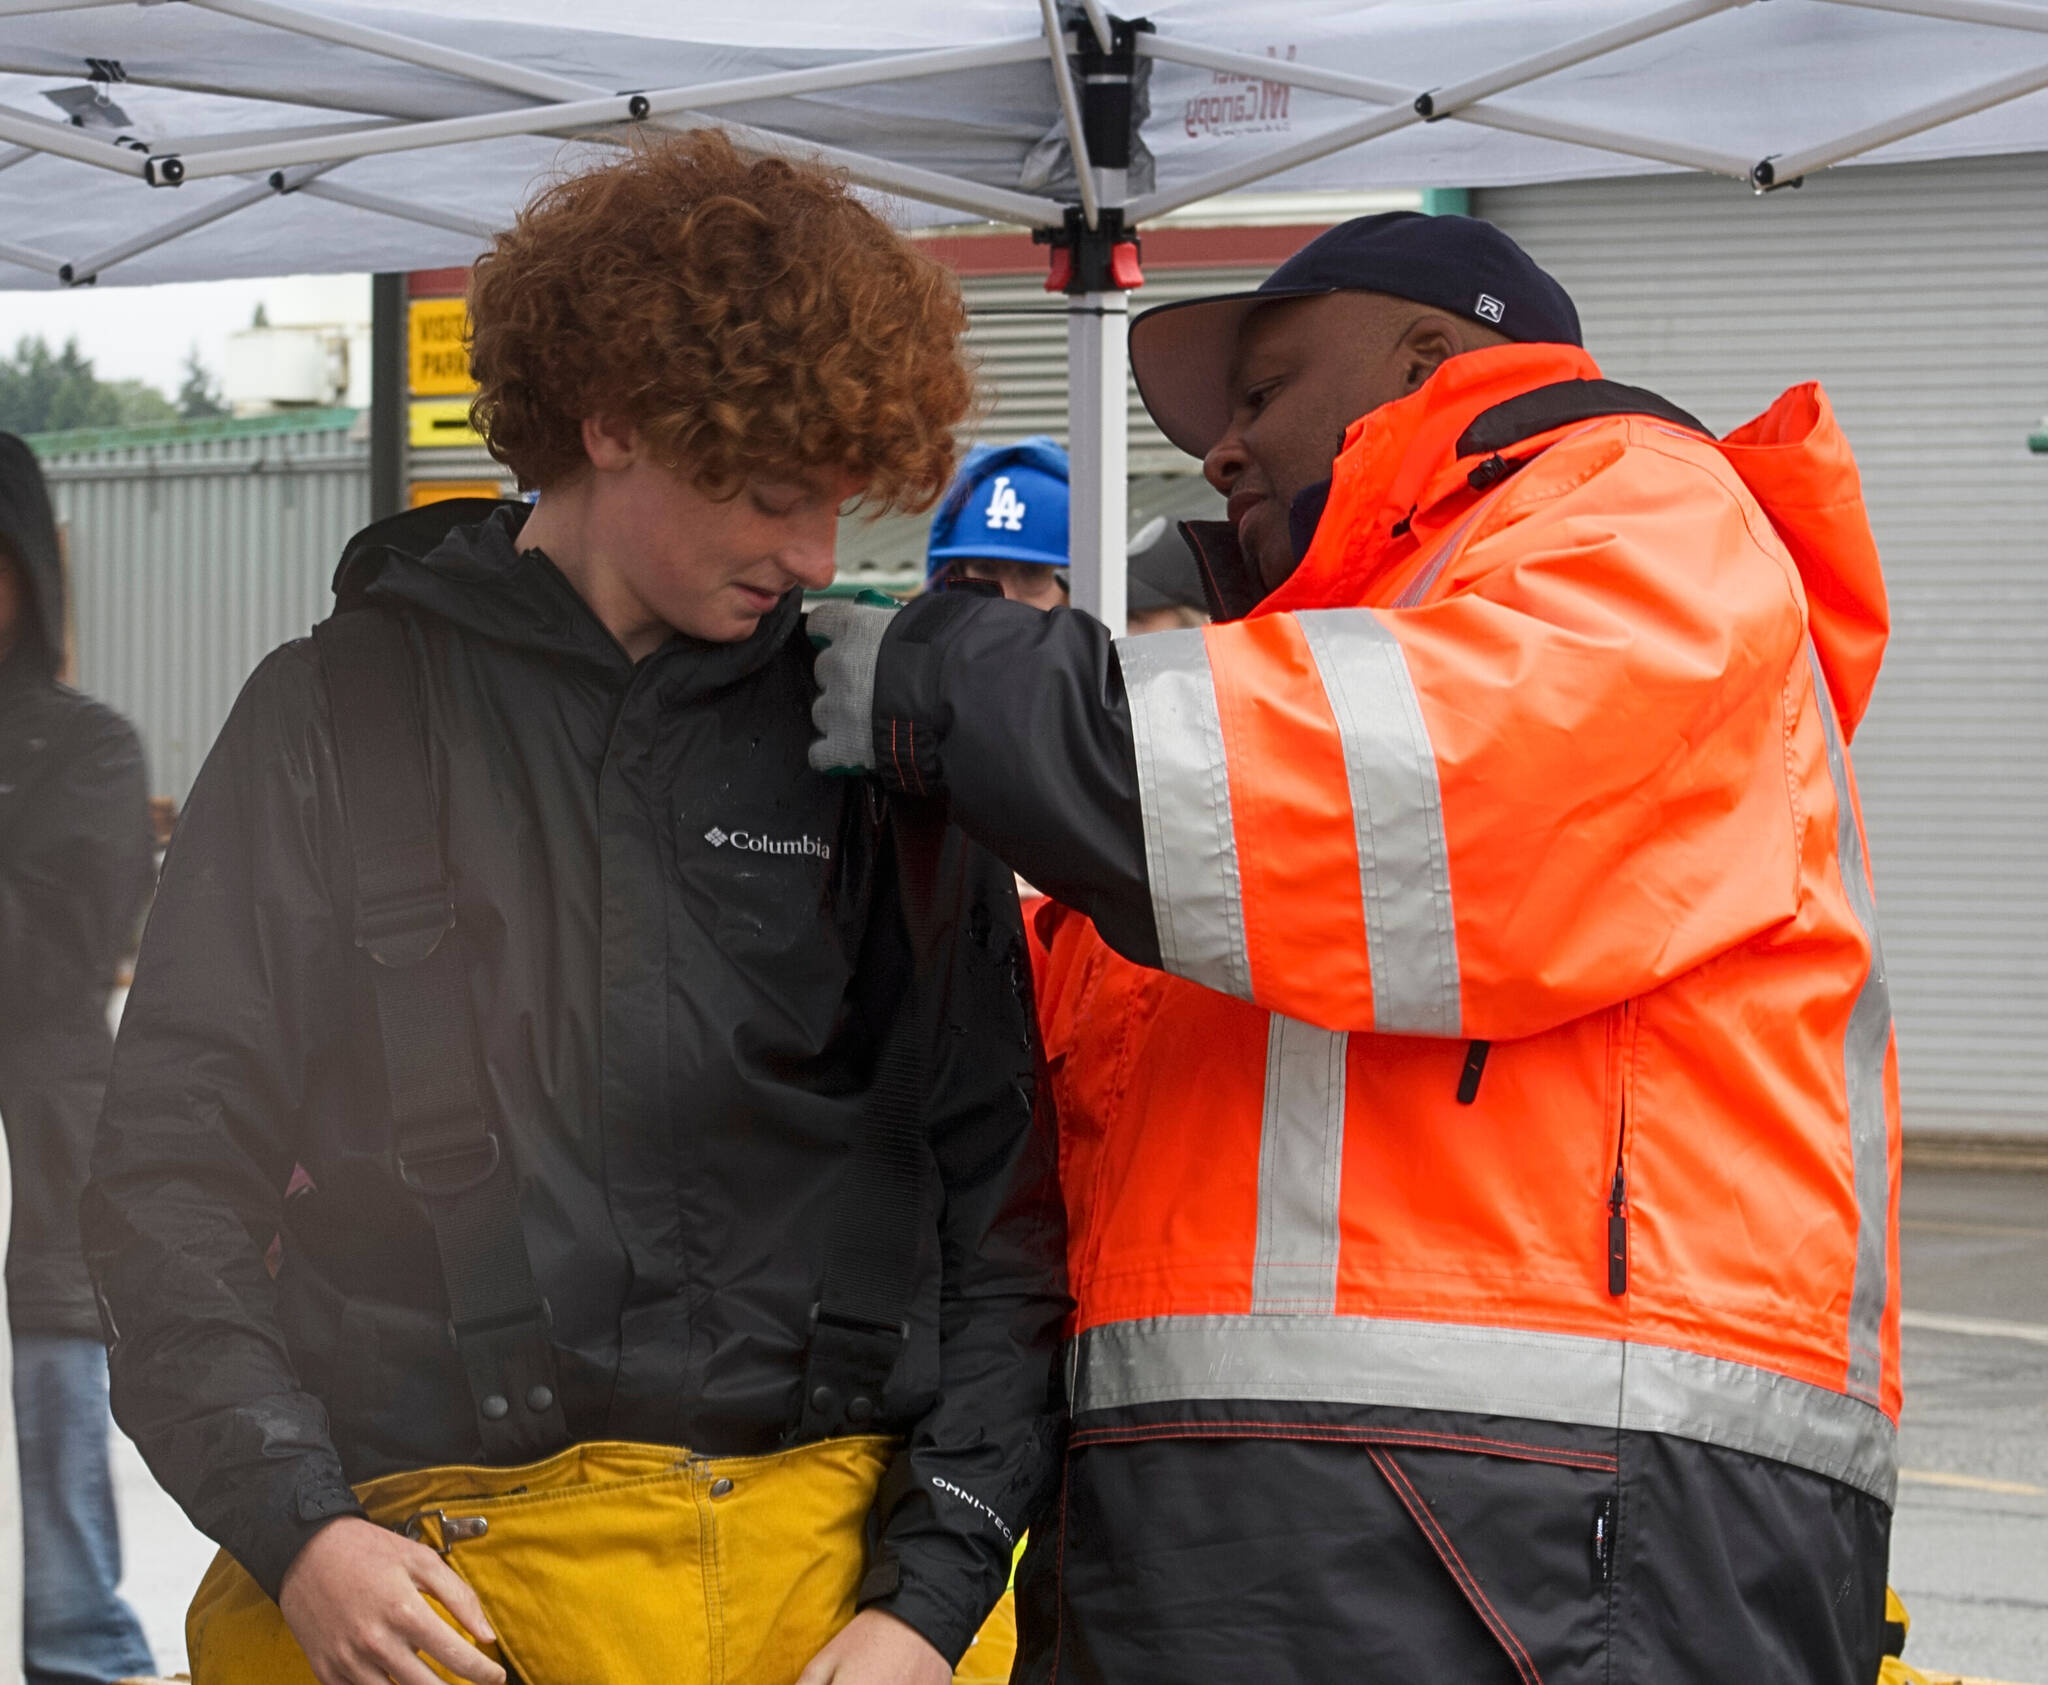 Boatswain Derrick Fant assists student Jack Carrieds don firefighting gear in a demonstration.